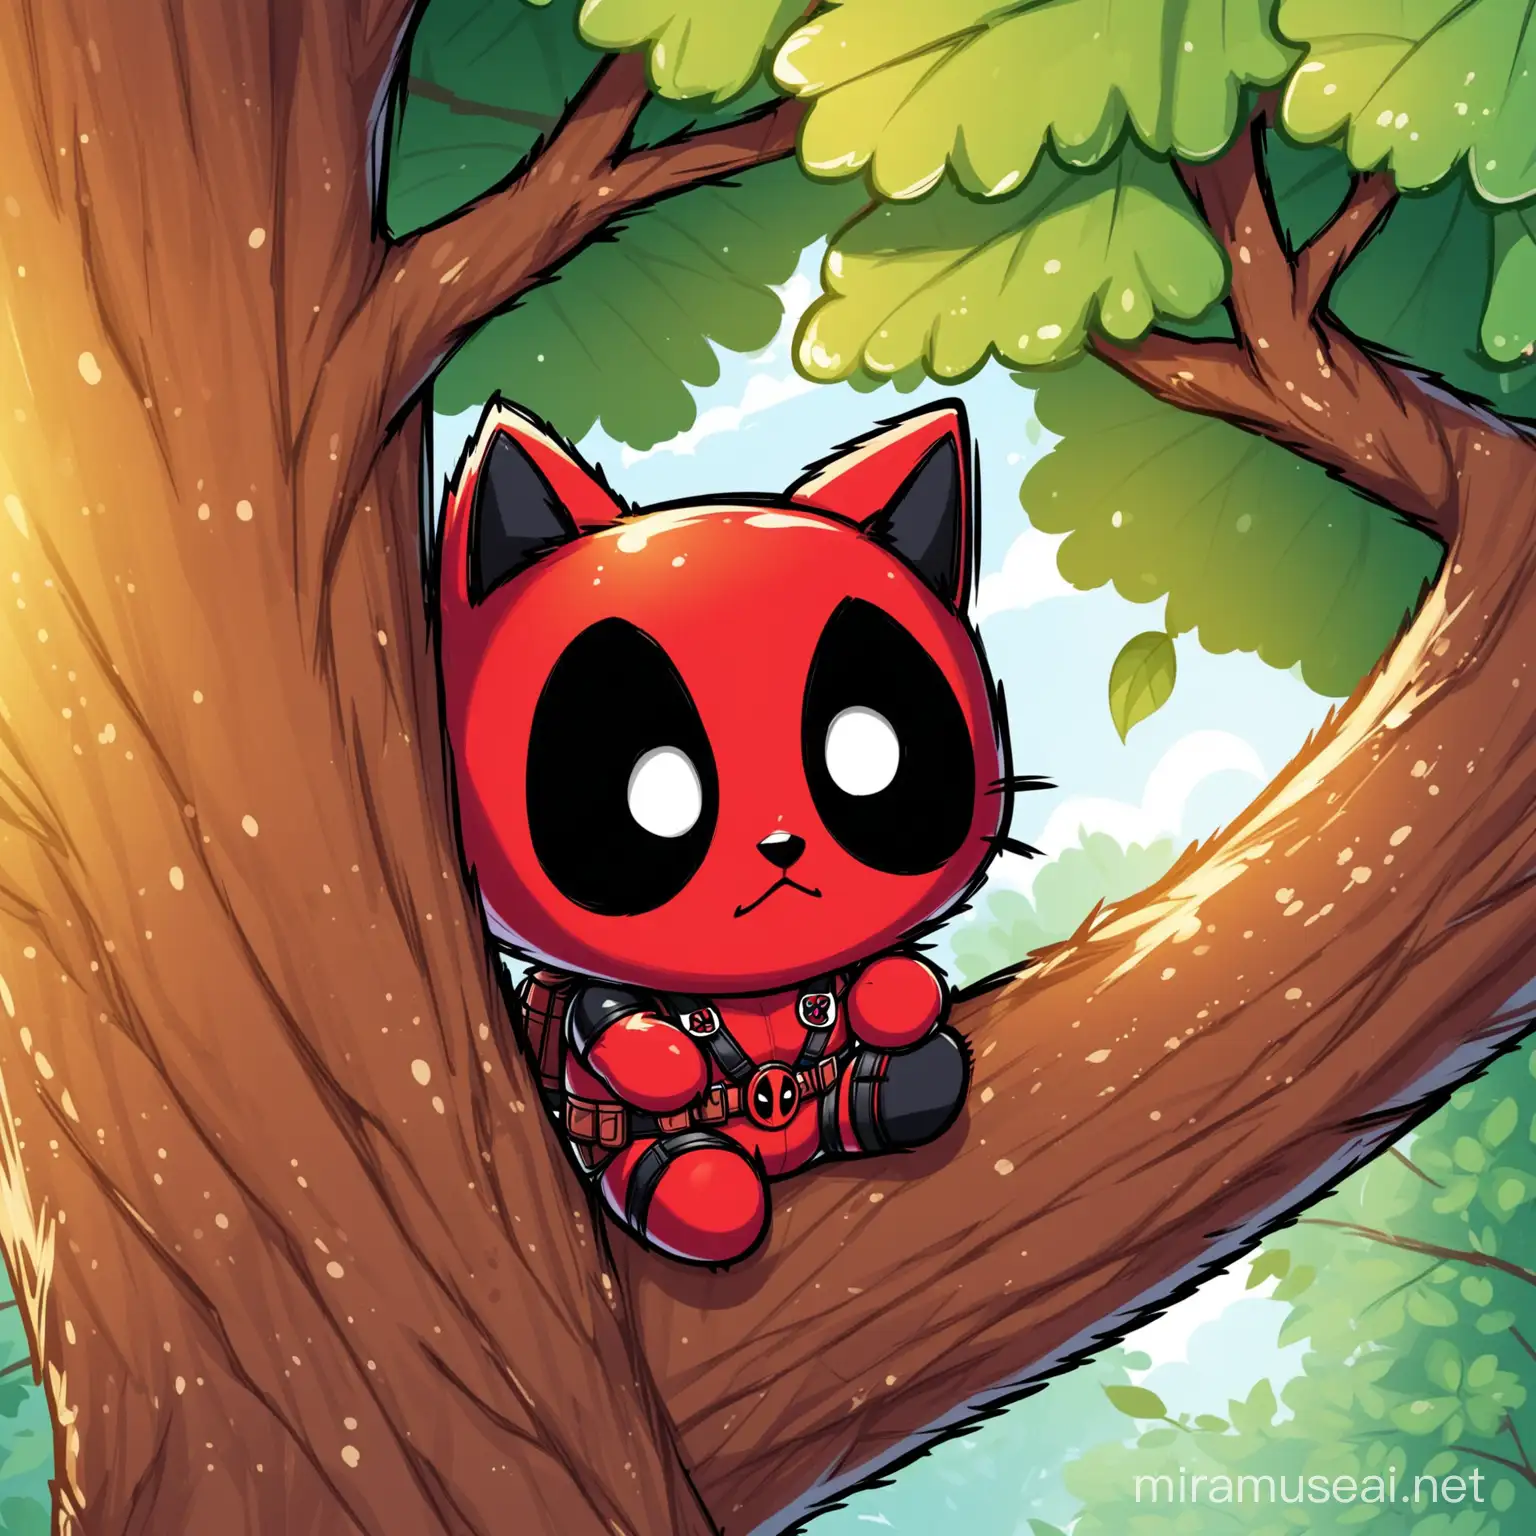 draw an image of chibi deadpool cat stuck in a tree